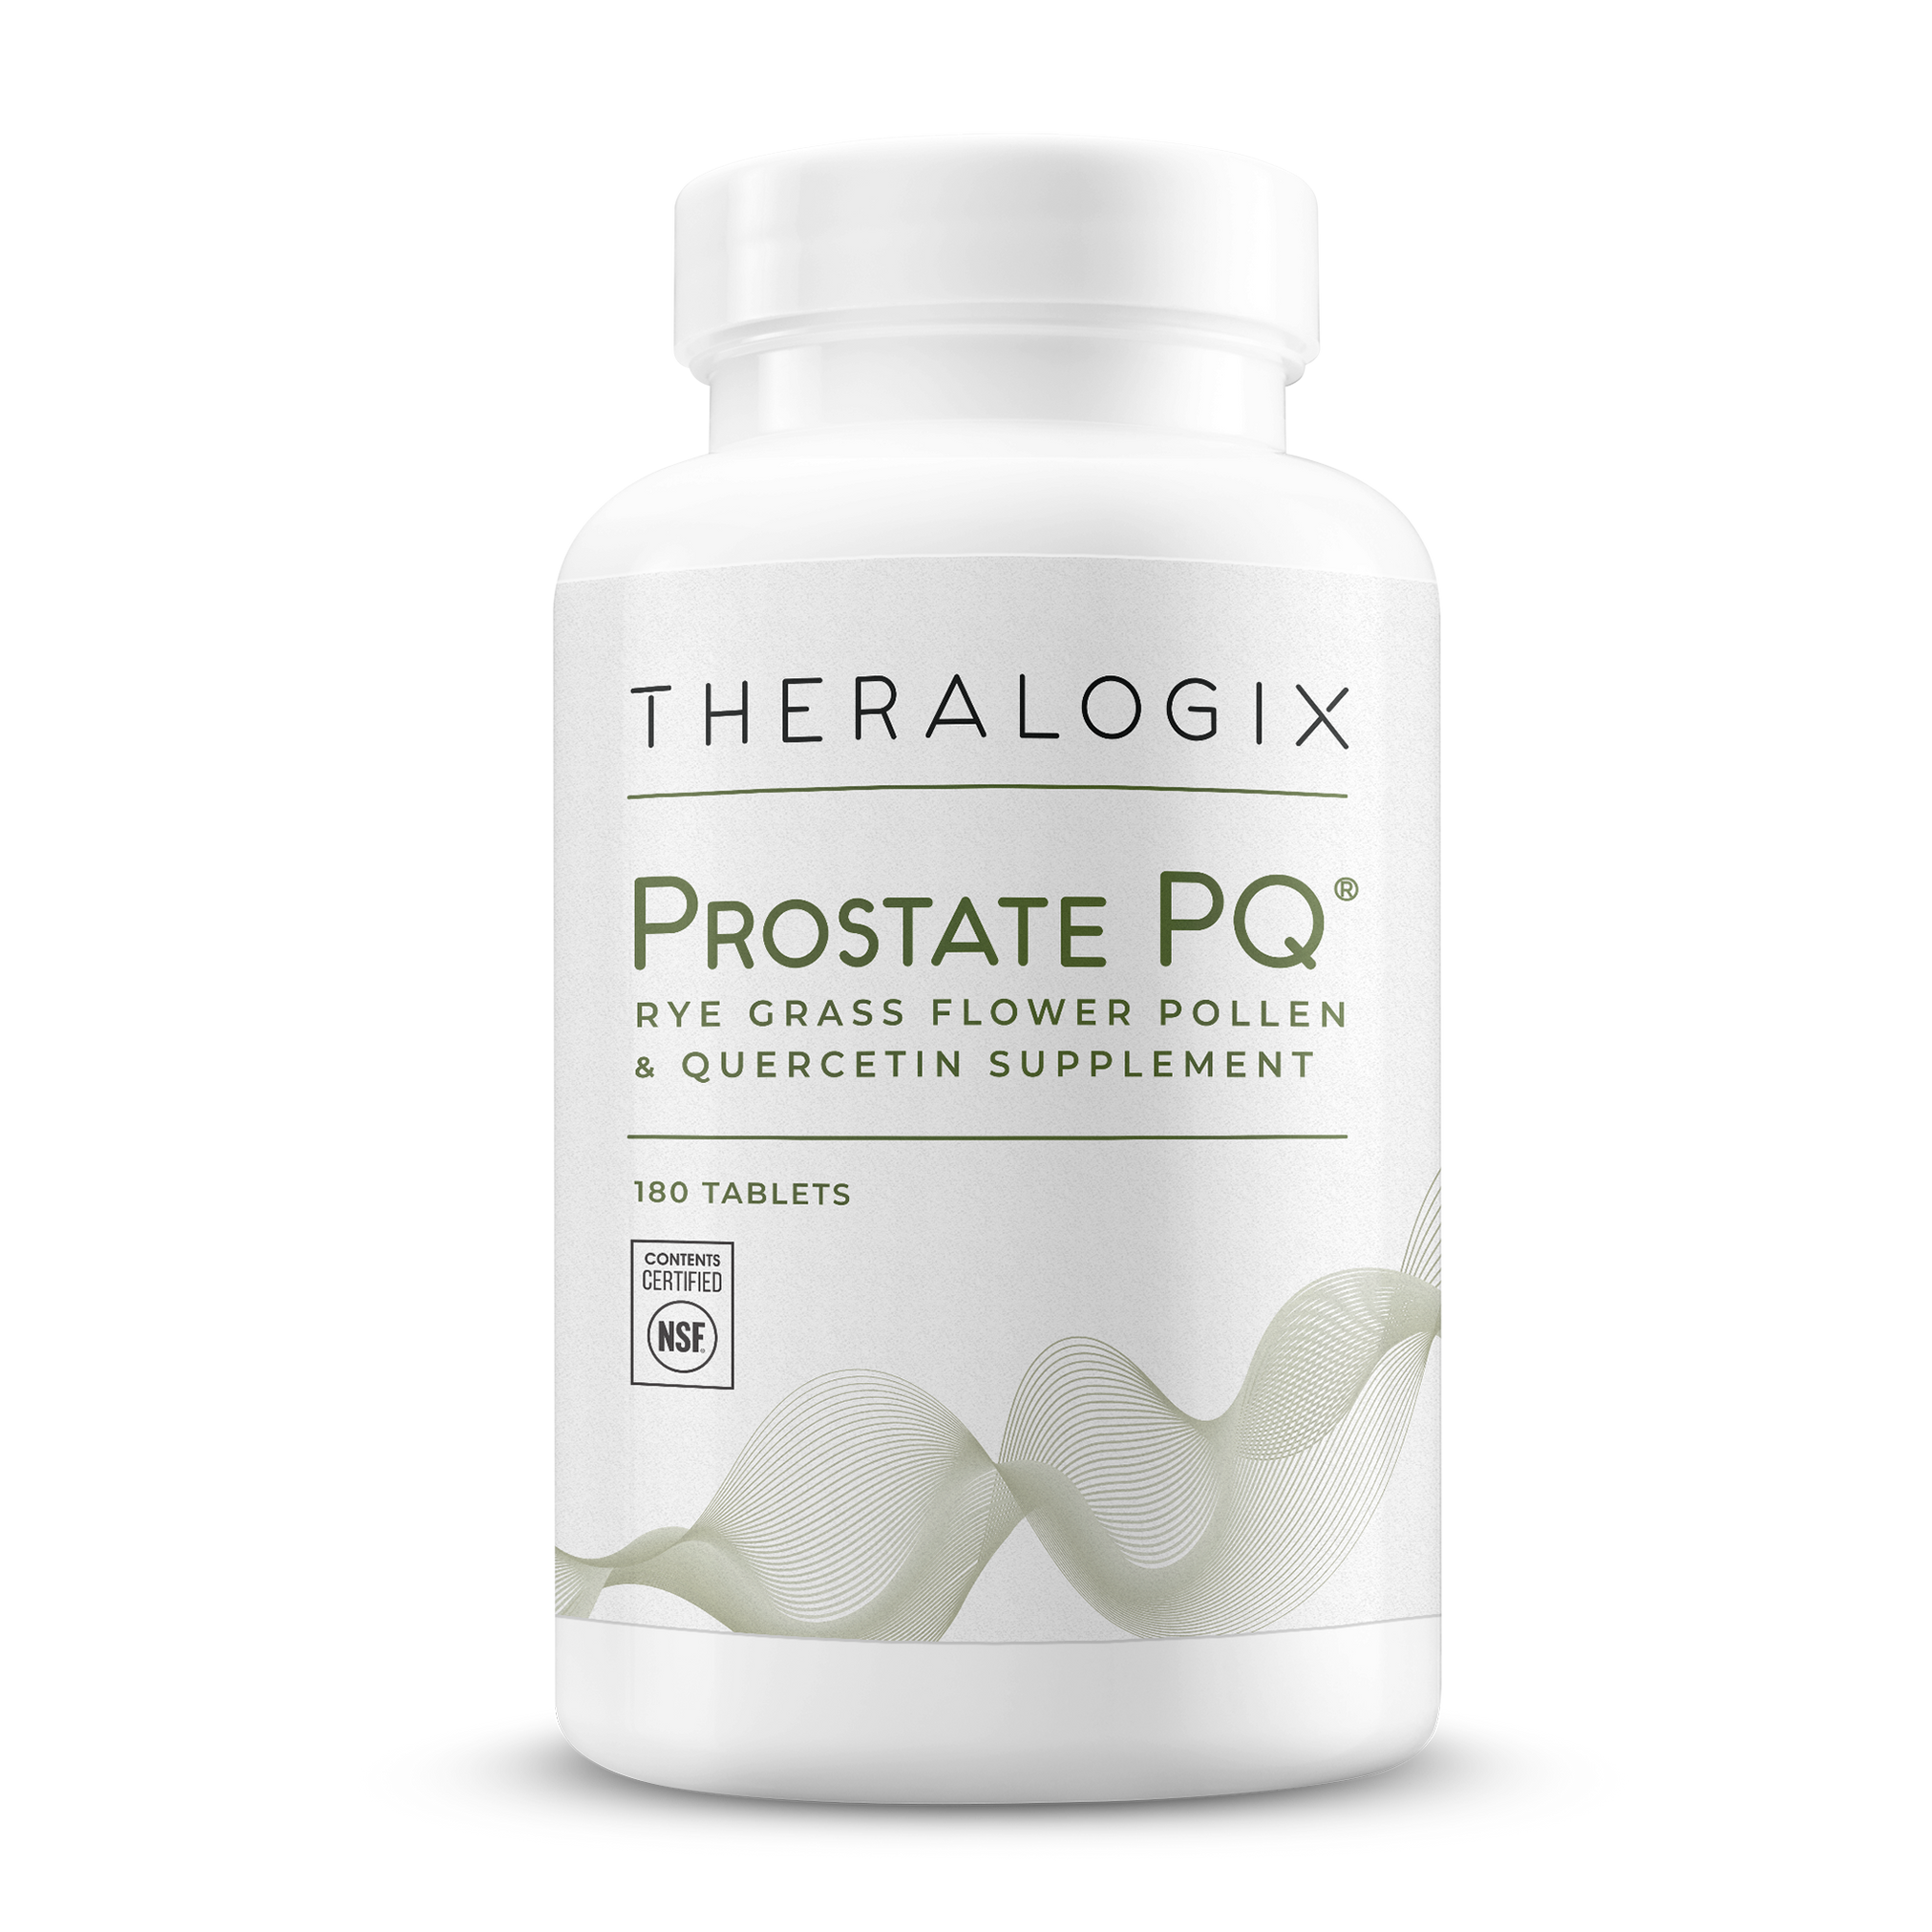 Prostate support supplement with a combination of rye grass flower pollen extract and quercetin to address pelvic discomfort and support healthy urinary function.